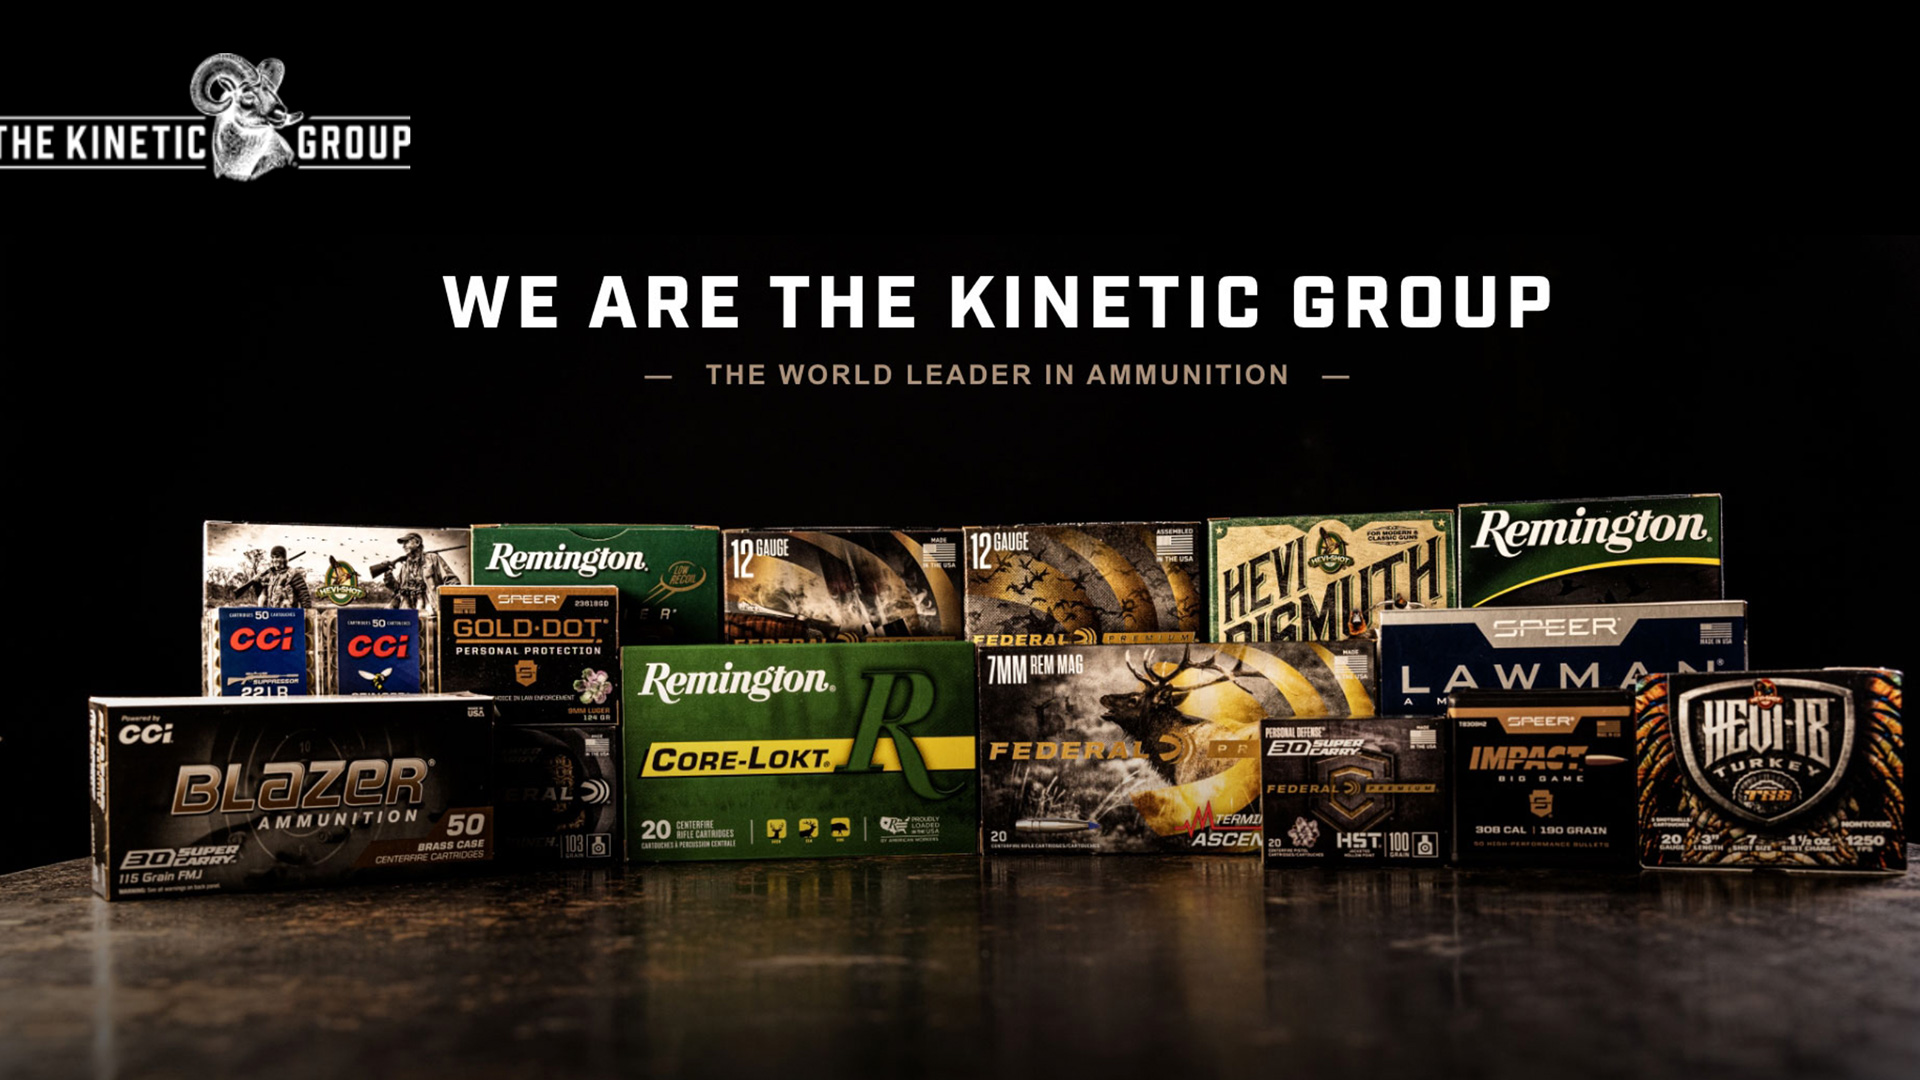 The Kinetic Group